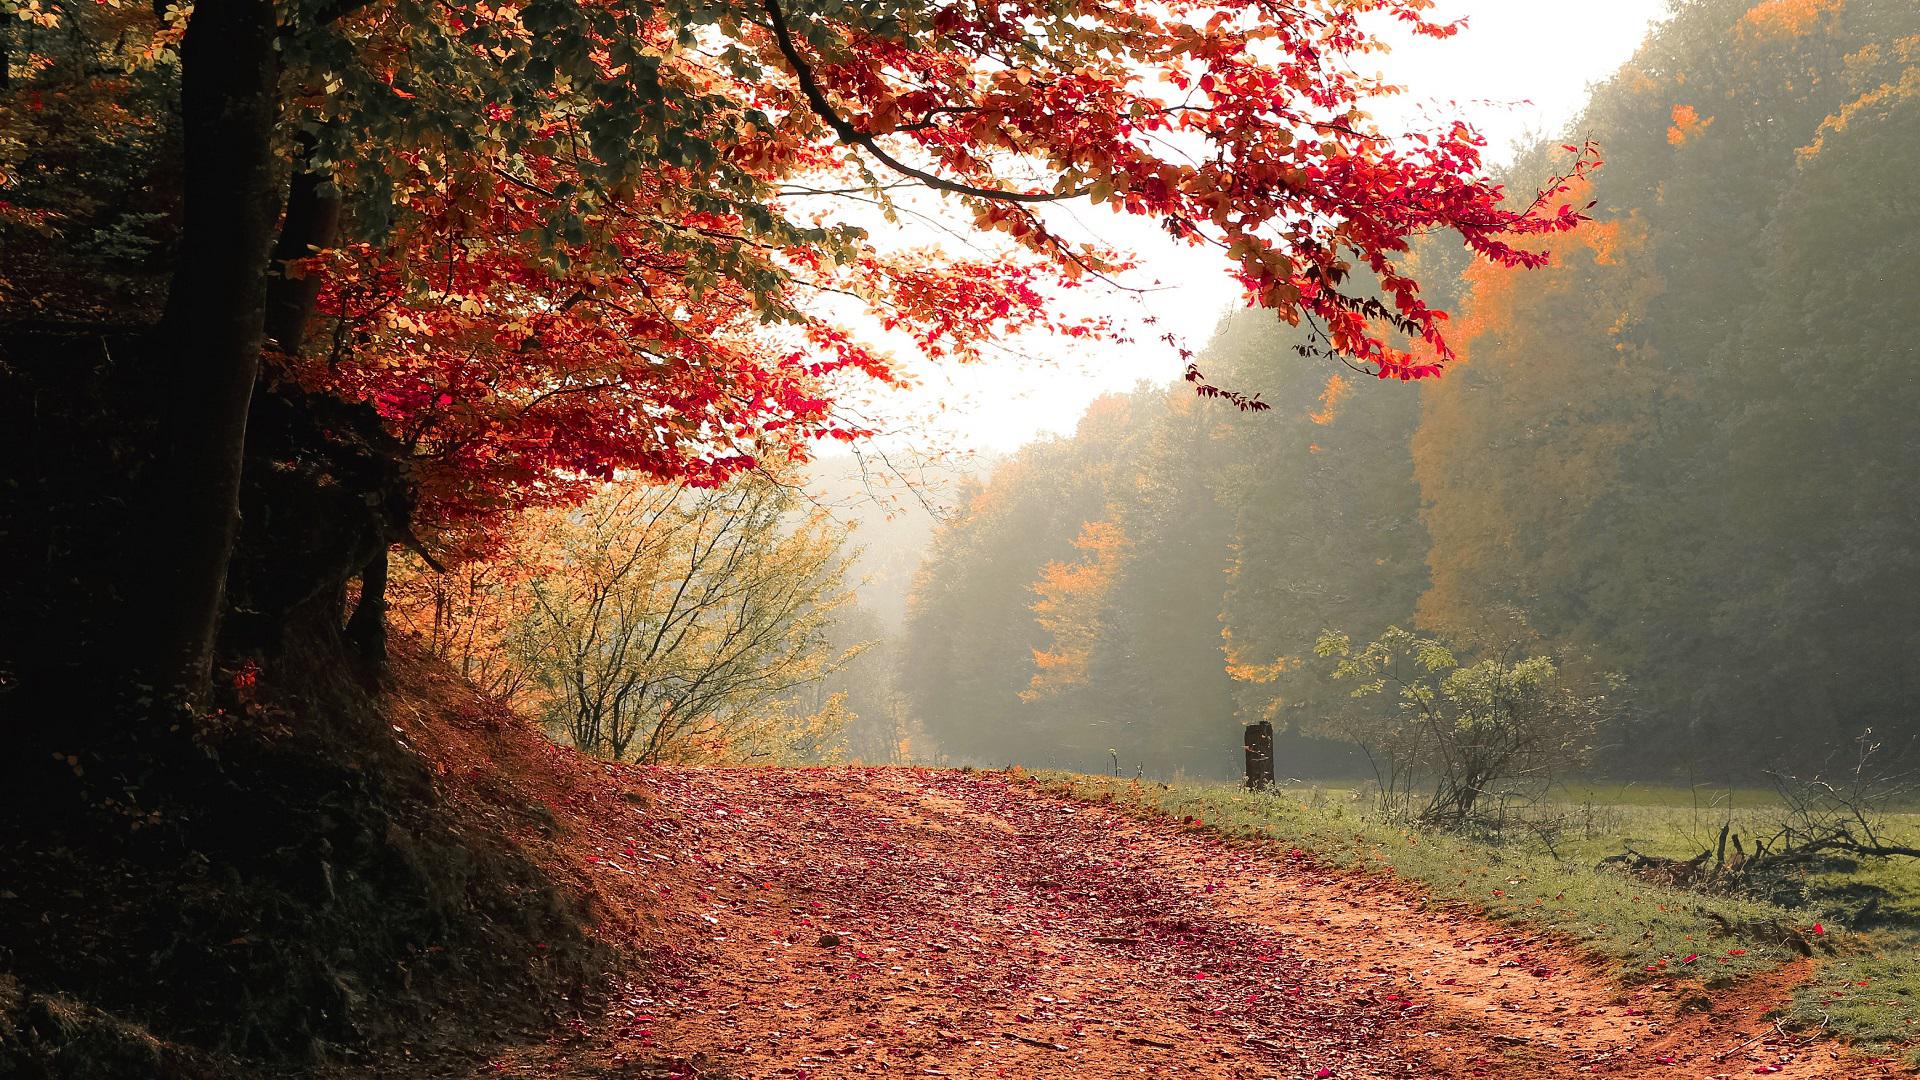 General 1920x1080 nature red trees path fall green calm